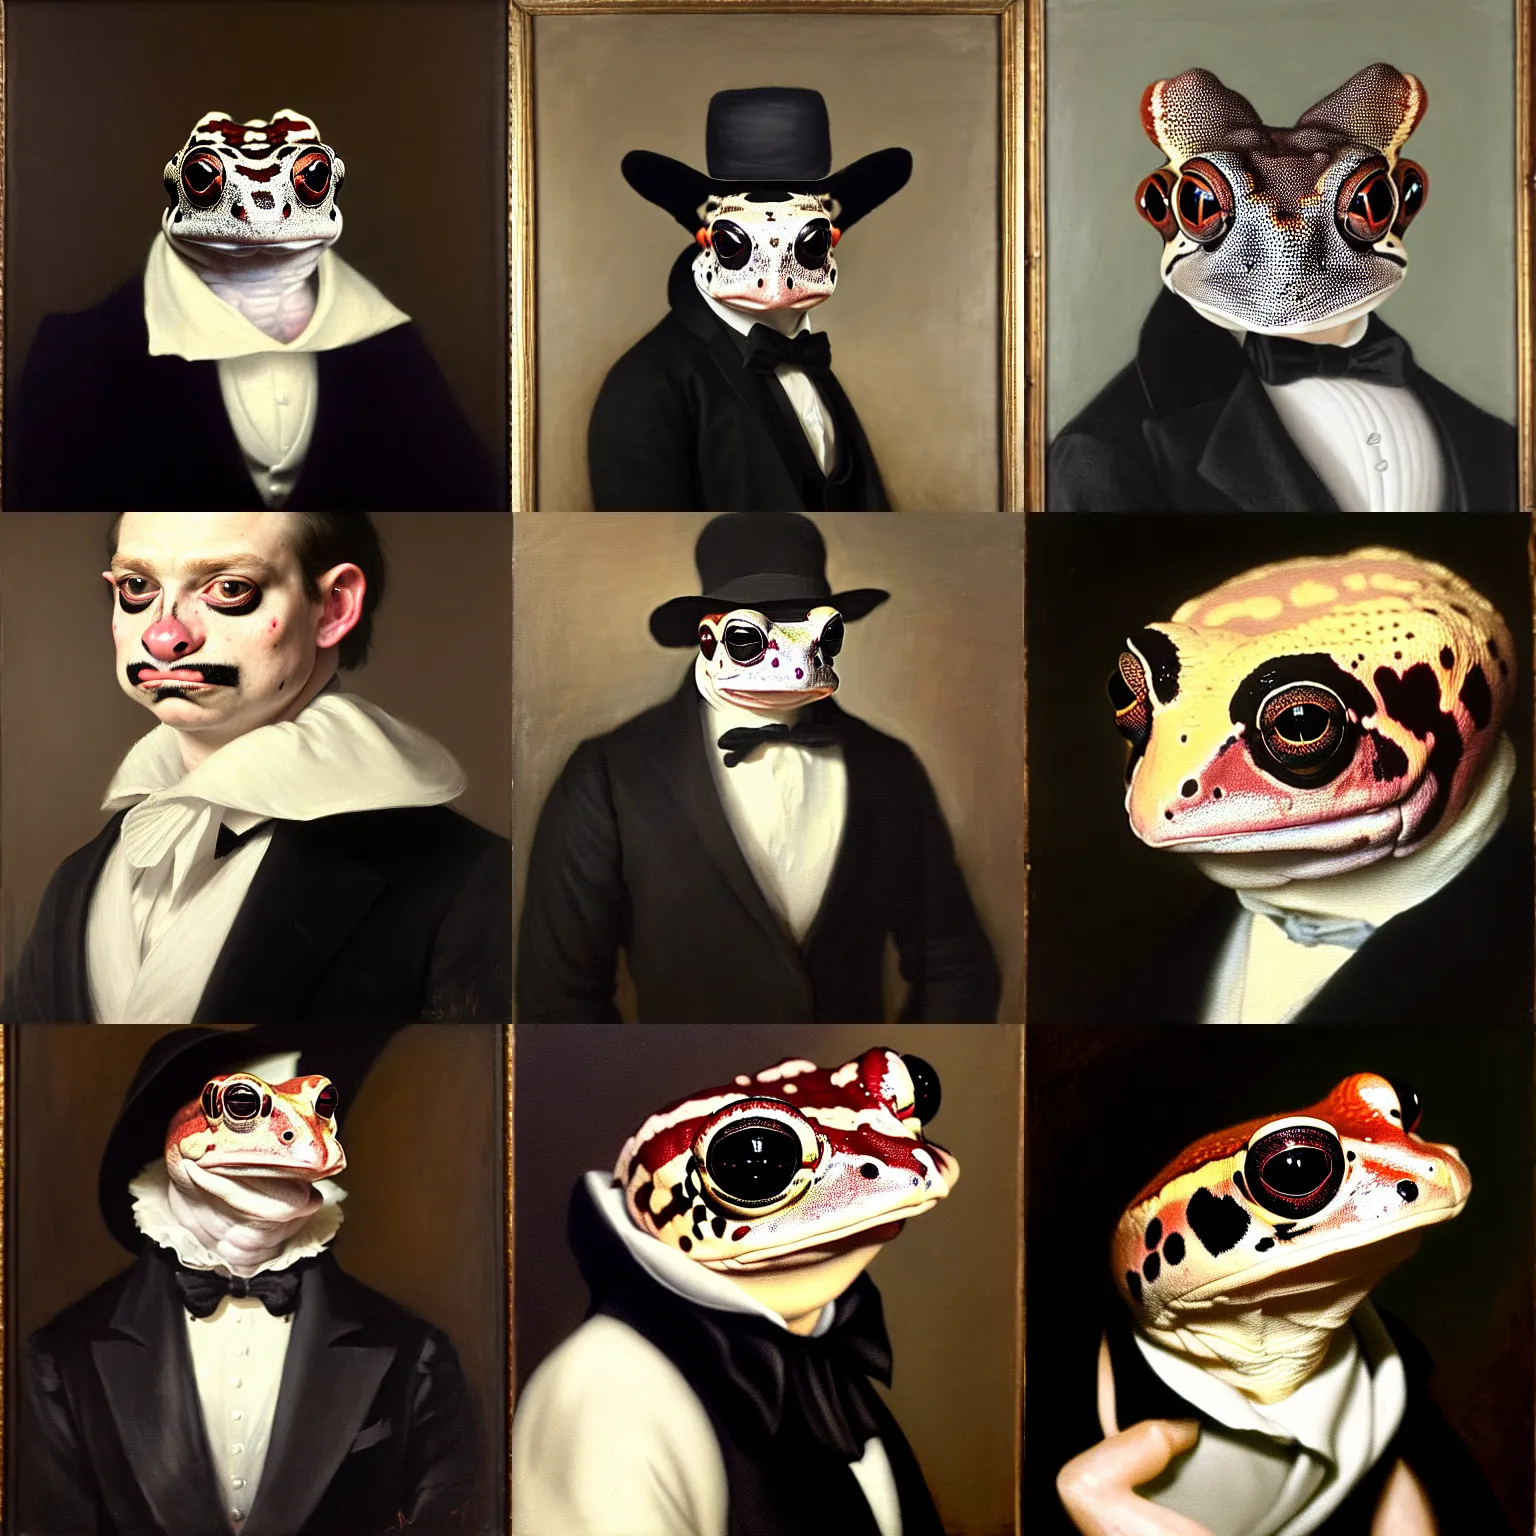 Prompt: a head - and - shoulders portrait of an amazon milk frog looking off camera wearing a black frock coat and a white ascot tie, an american romanticism painting, a portrait painting, cgsociety, soft focus, oil on canvas